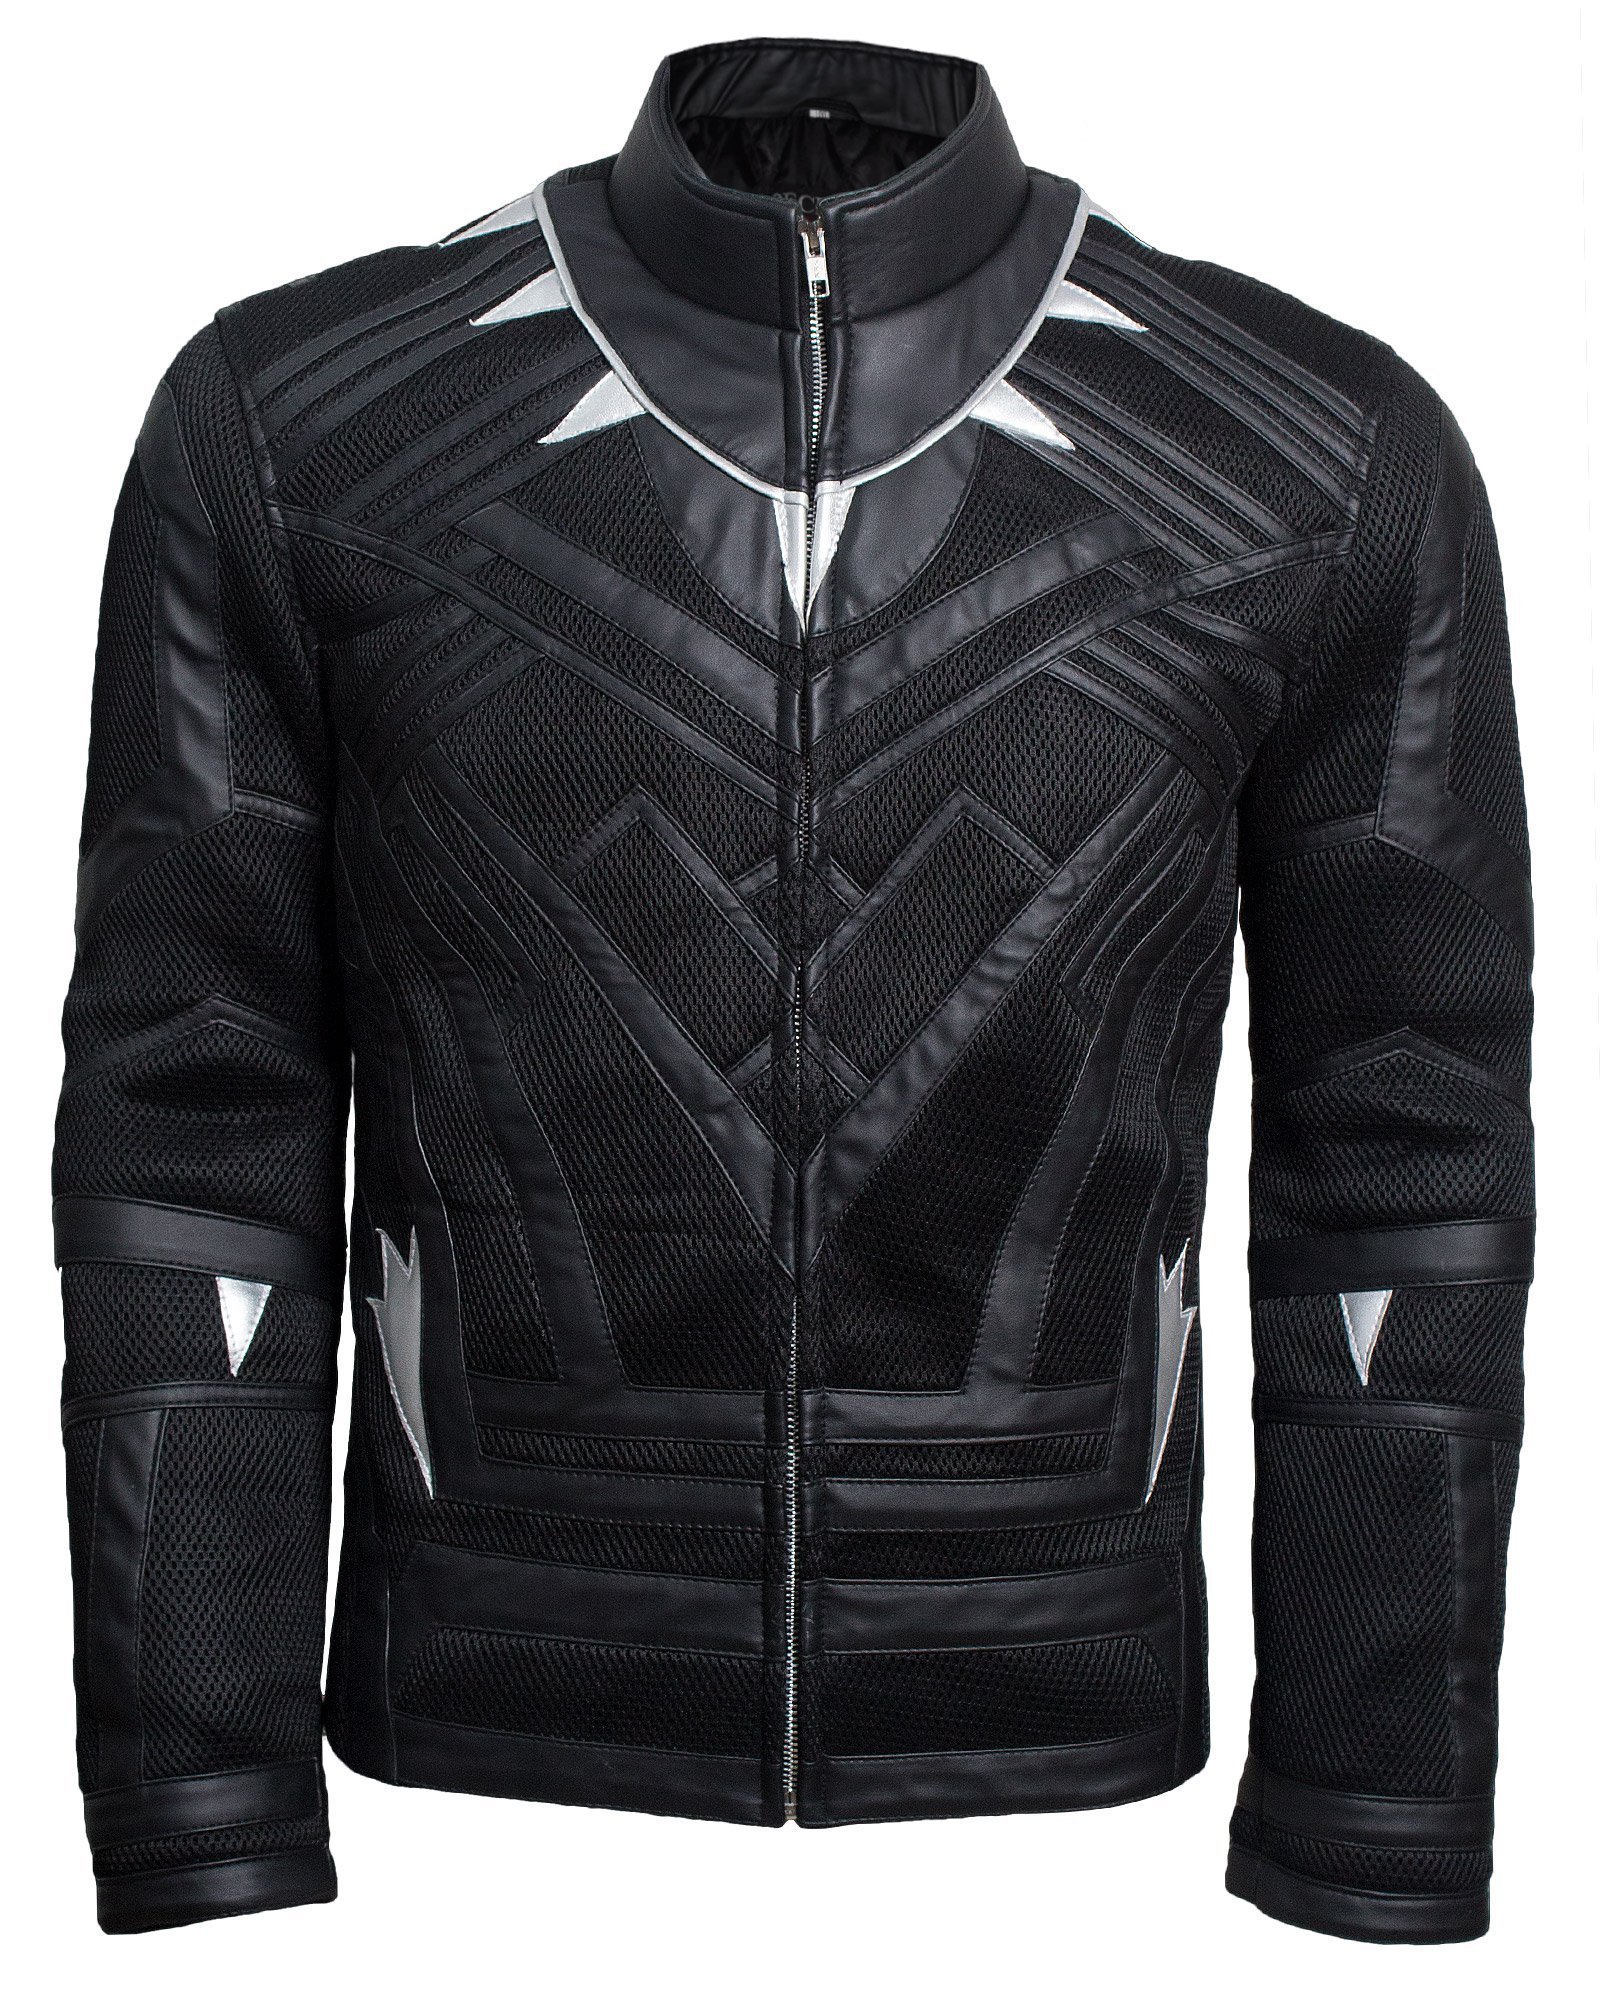 Black Panther Jacket is the inspiration taken from the blockbuster superher...